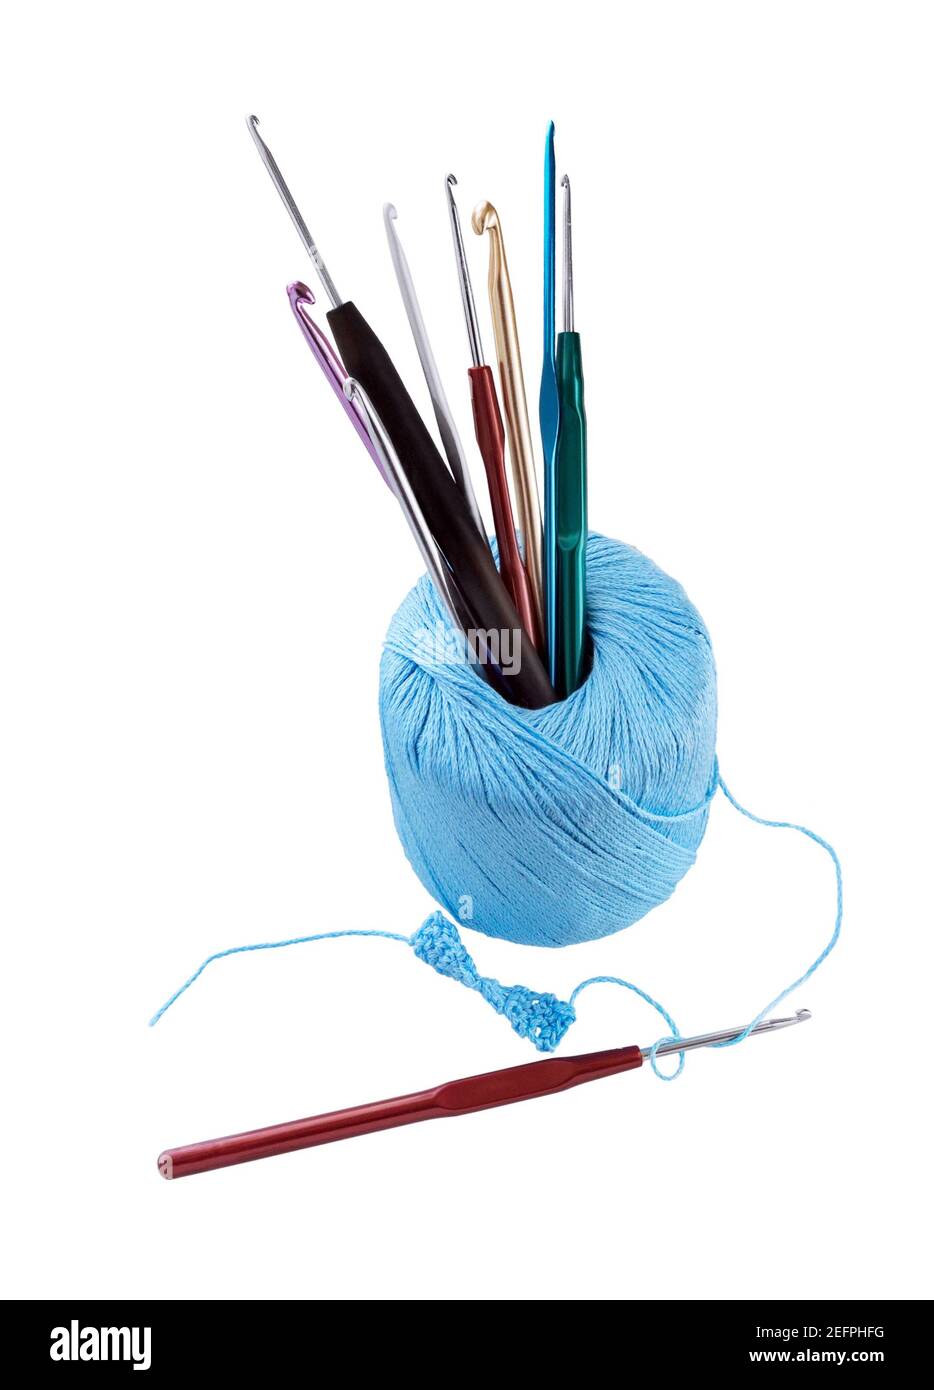 Hook crochet set. Ball of yarn with different sizes of crochet hooks isolated on white background. Stock Photo